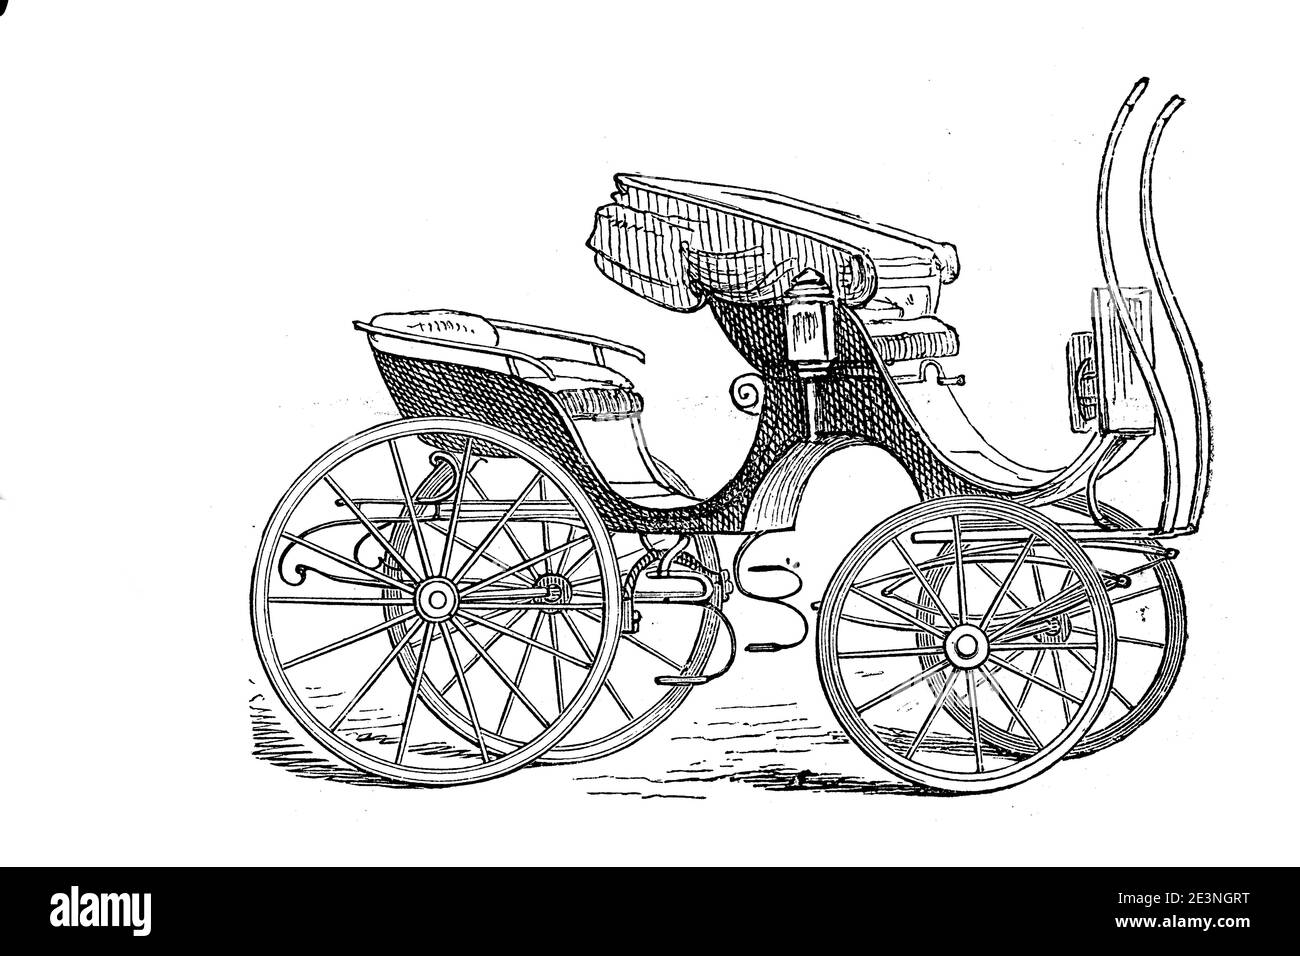 Carriage, Phaeton, Gentleman's carriage, illustration from 1870  /  Kutsche, Phaeton, Herrenkutsche, Illustration aus 1870, Historisch, historical, digital improved reproduction of an original from the 19th century / digitale Reproduktion einer Originalvorlage aus dem 19. Jahrhundert, Stock Photo